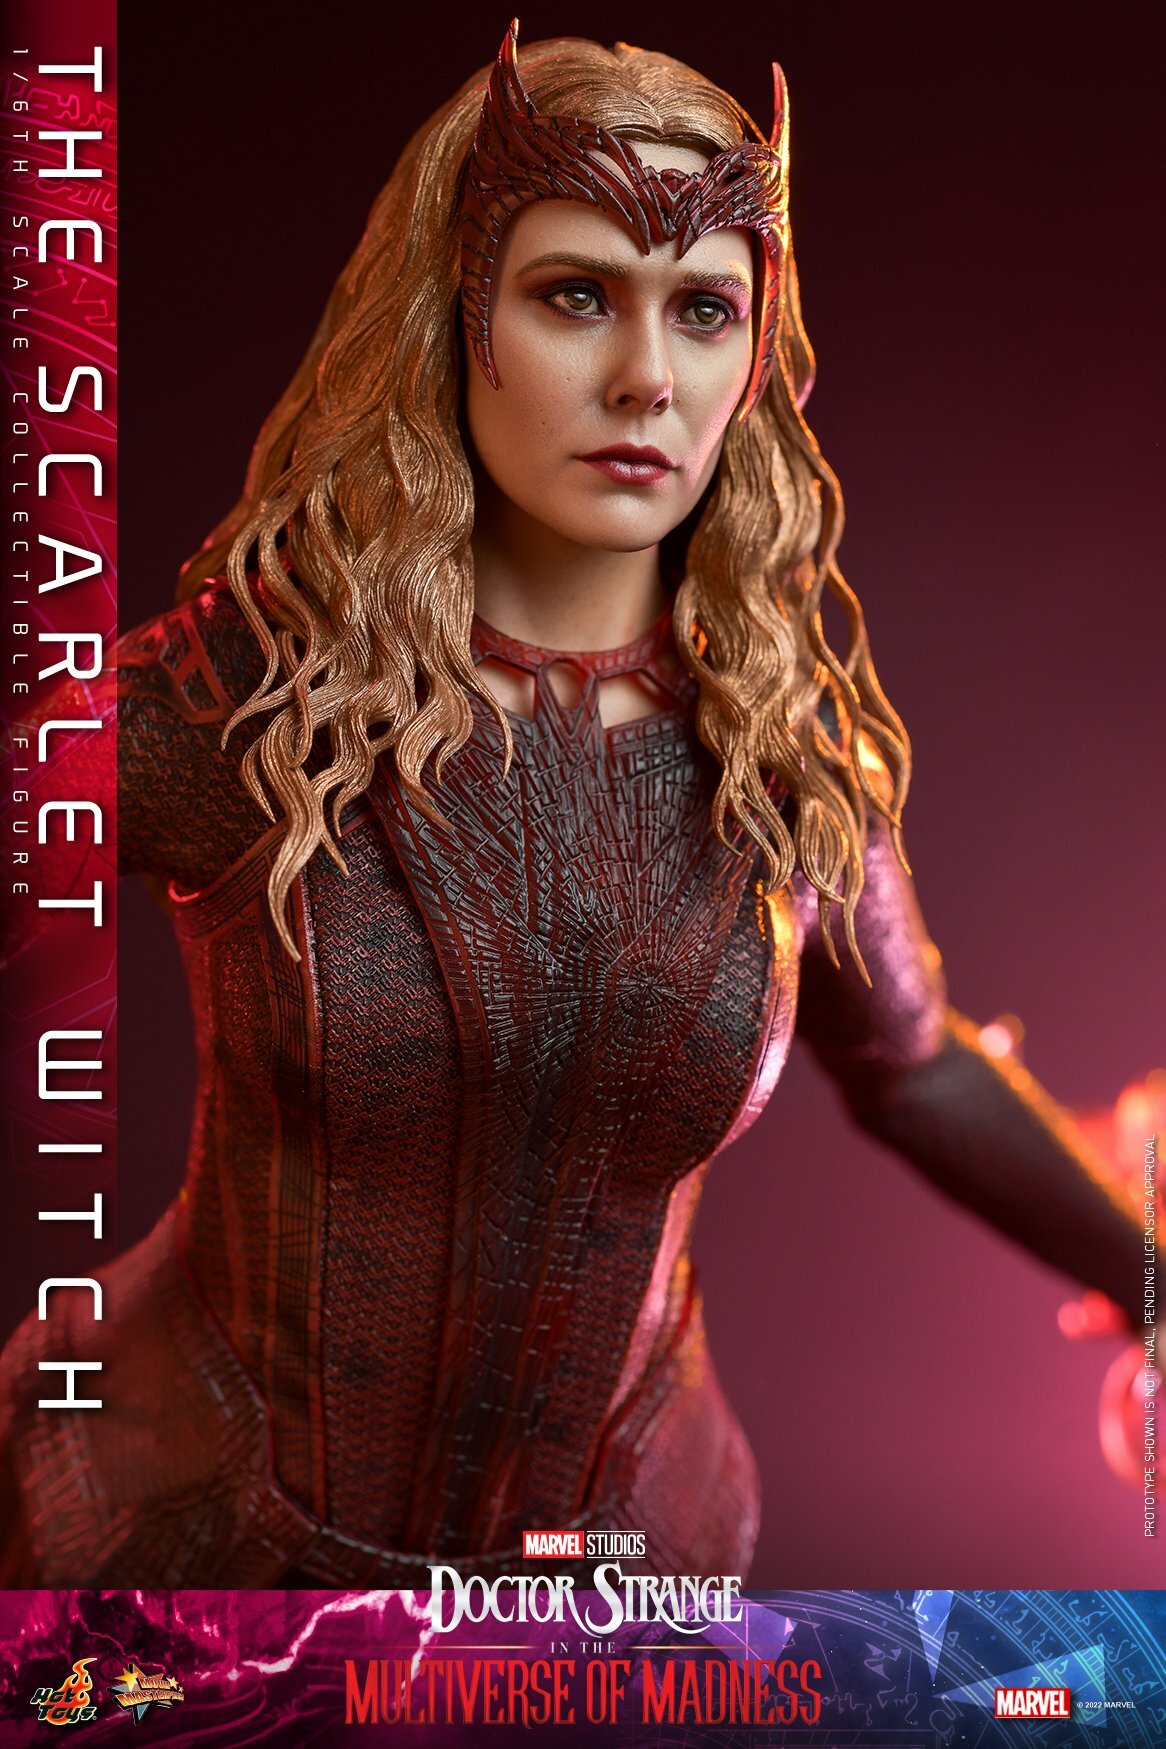 Hot-Toy-Multiverse-of-Madness-Scarlet-Witch-009.jpg.cb1909dad595398b54098774c1410d20.jpg